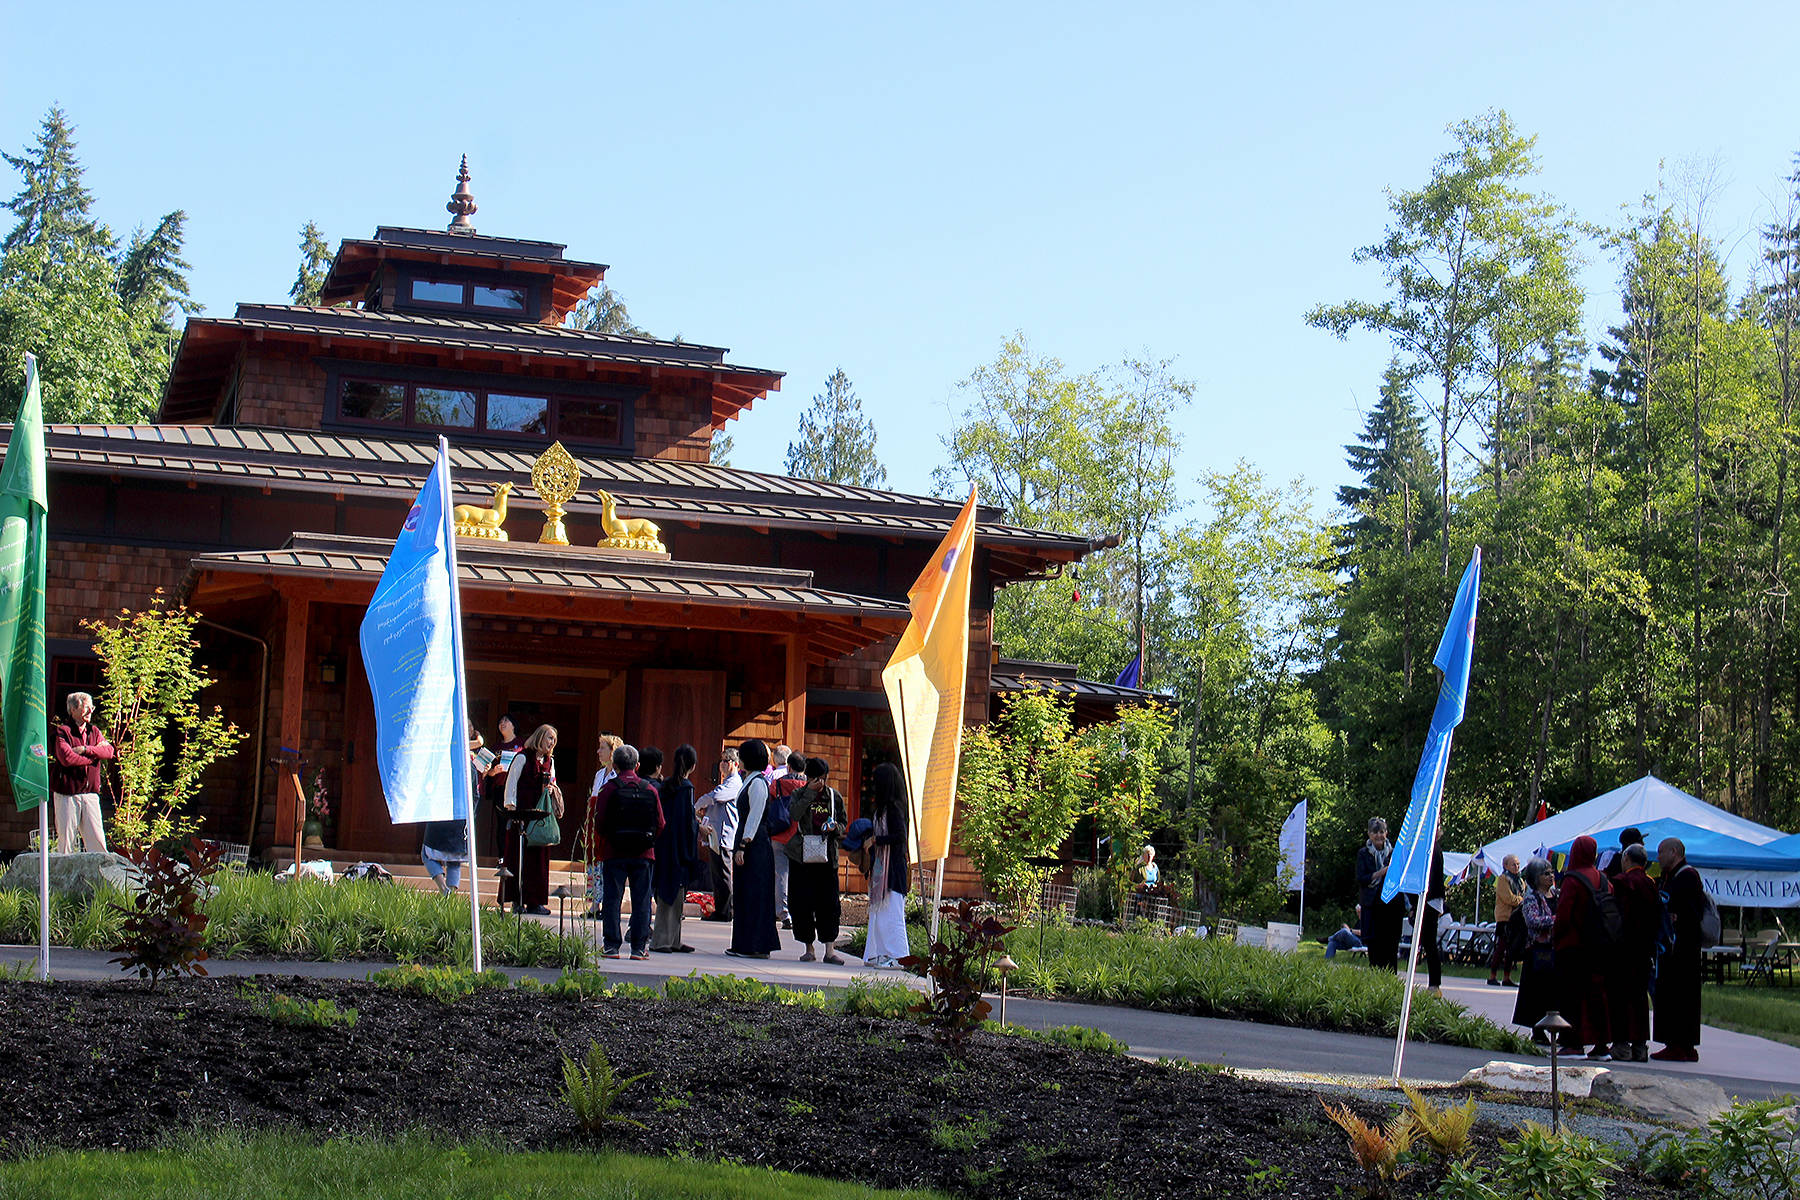 The new Buddhist Temple located in South Whidbey combines Northwest architecture with traditional Tibetan design. A multi-day gathering consecrated the building with monks who traveled from Asia for the ceremonies. Photo by Patricia Guthrie/Whidbey News Group